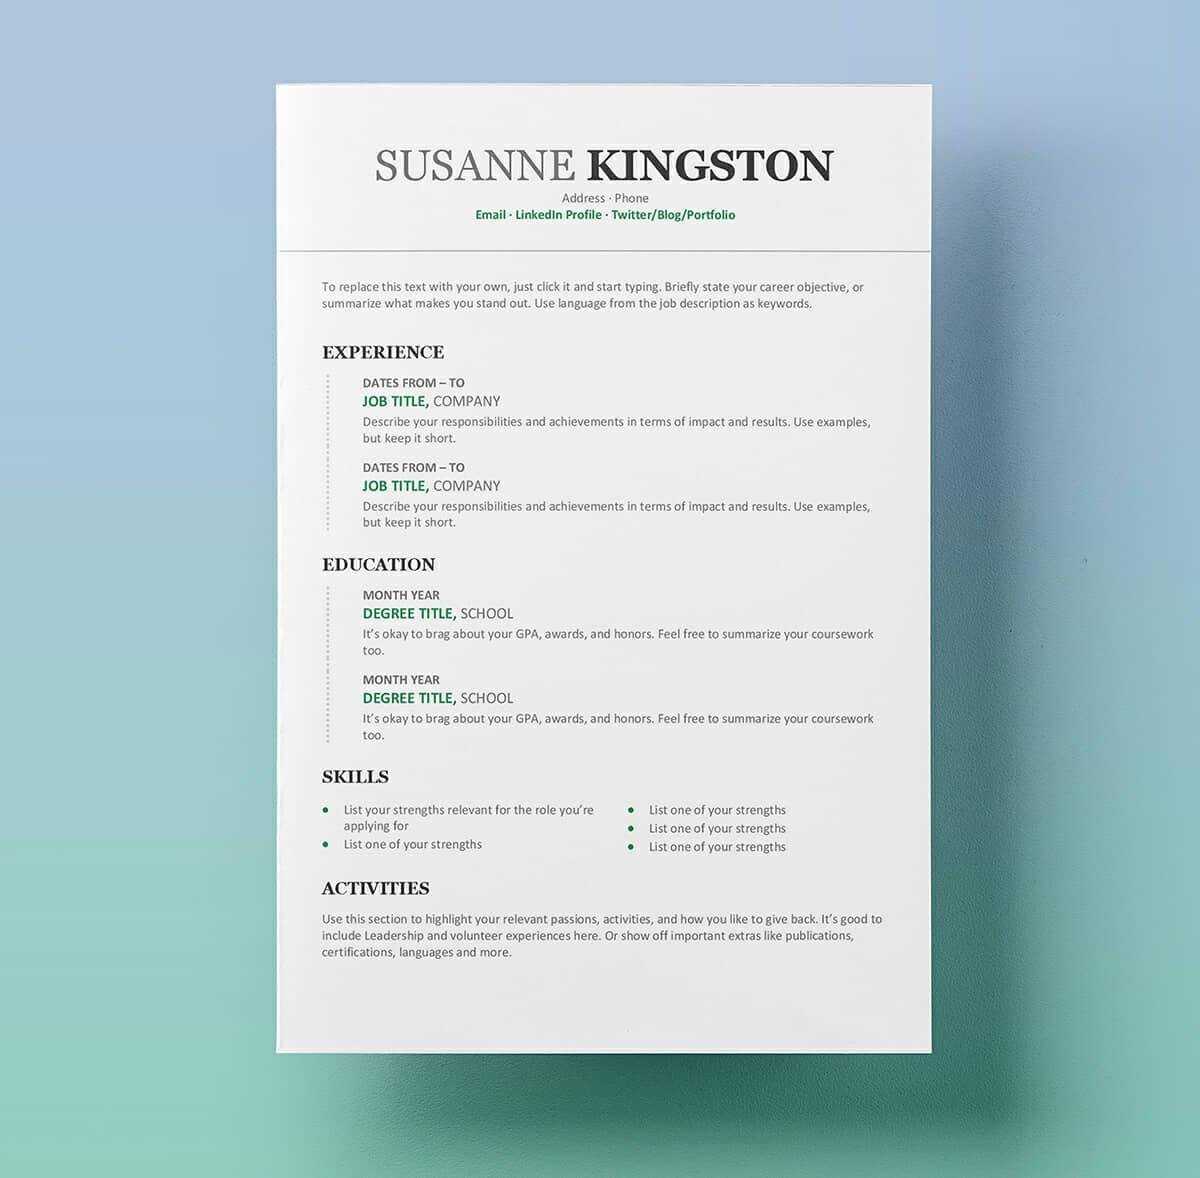 Resume Template For Word Lovely Resume Templates For Word Inside Free Downloadable Resume Templates For Word